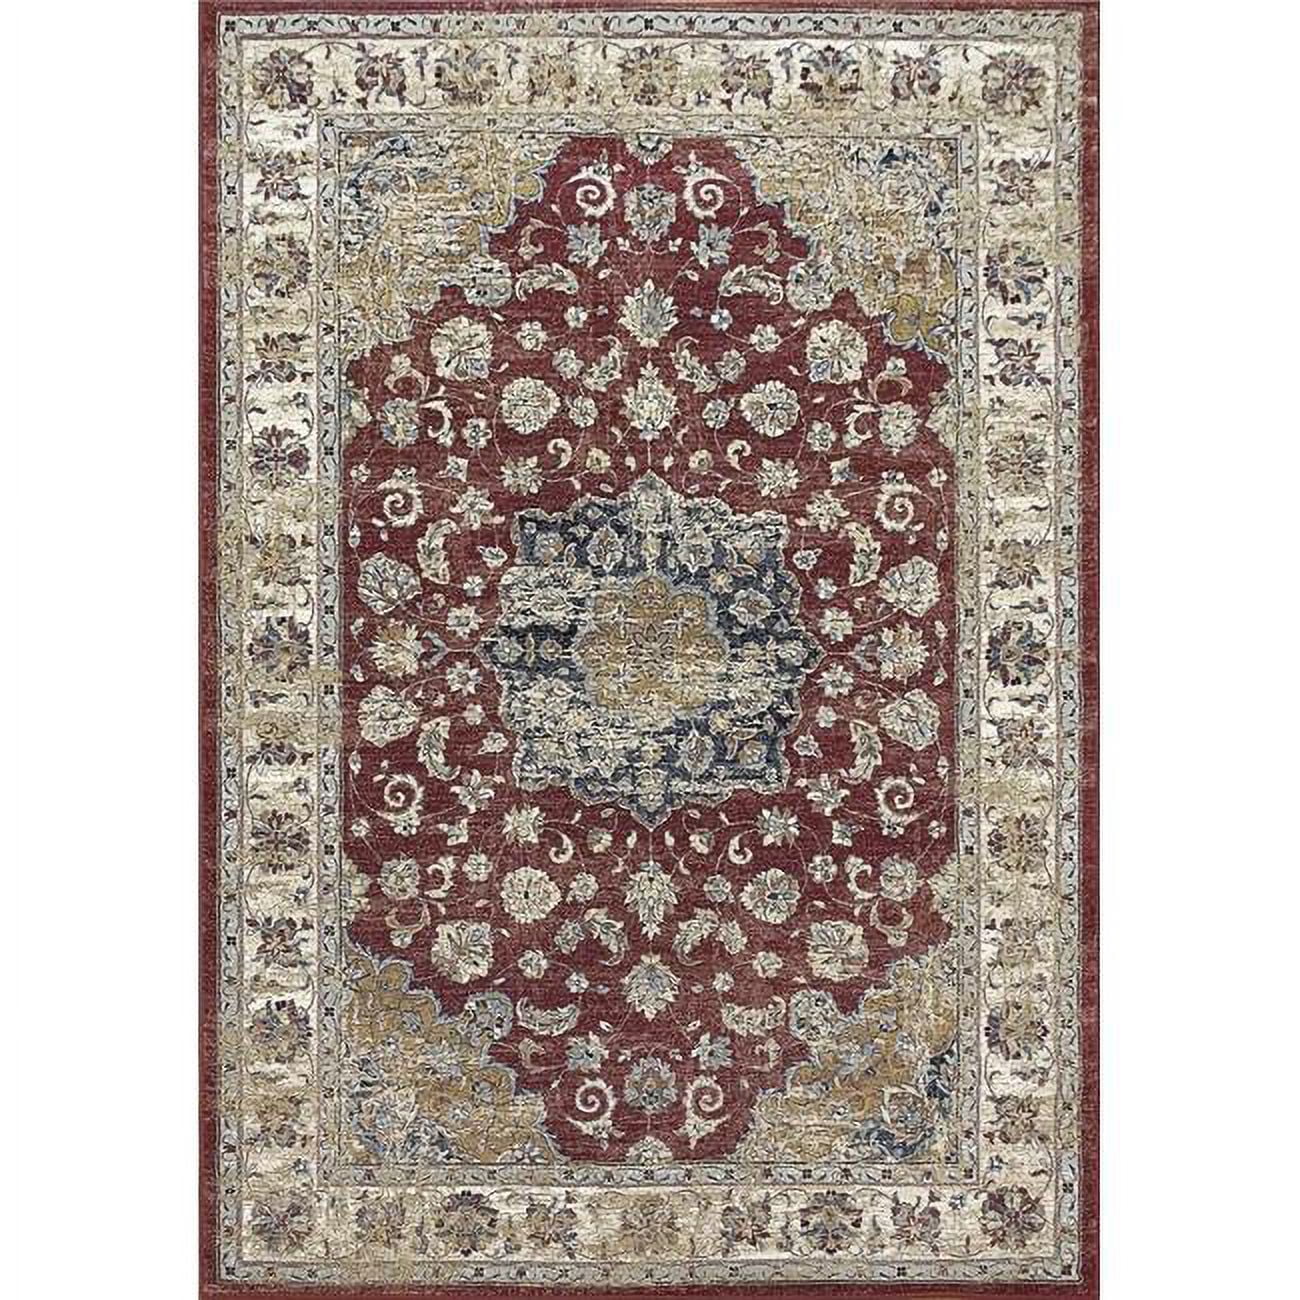 An710575591464 6 Ft. 7 In. X 9 Ft. 6 In. Ancient 57559 Rectangle Traditional Rug - 1464 Red & Ivory